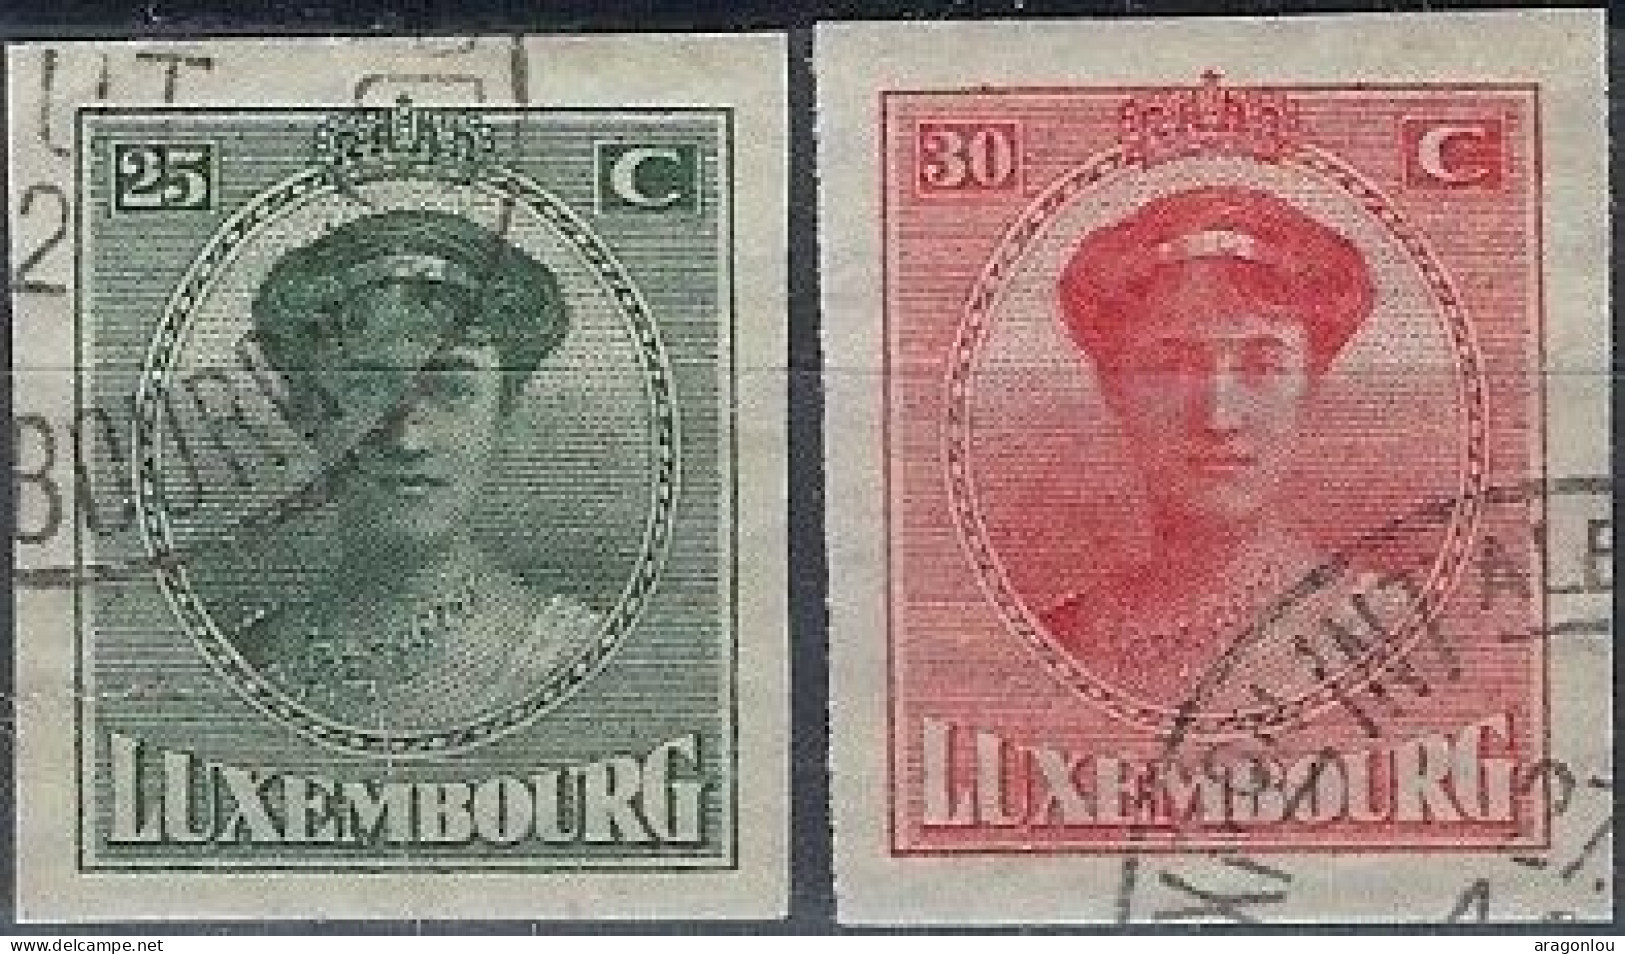 Luxembourg - Luxemburg -  Timbre  Série Charlotte   °   VC. 15,- - 1921-27 Charlotte Front Side